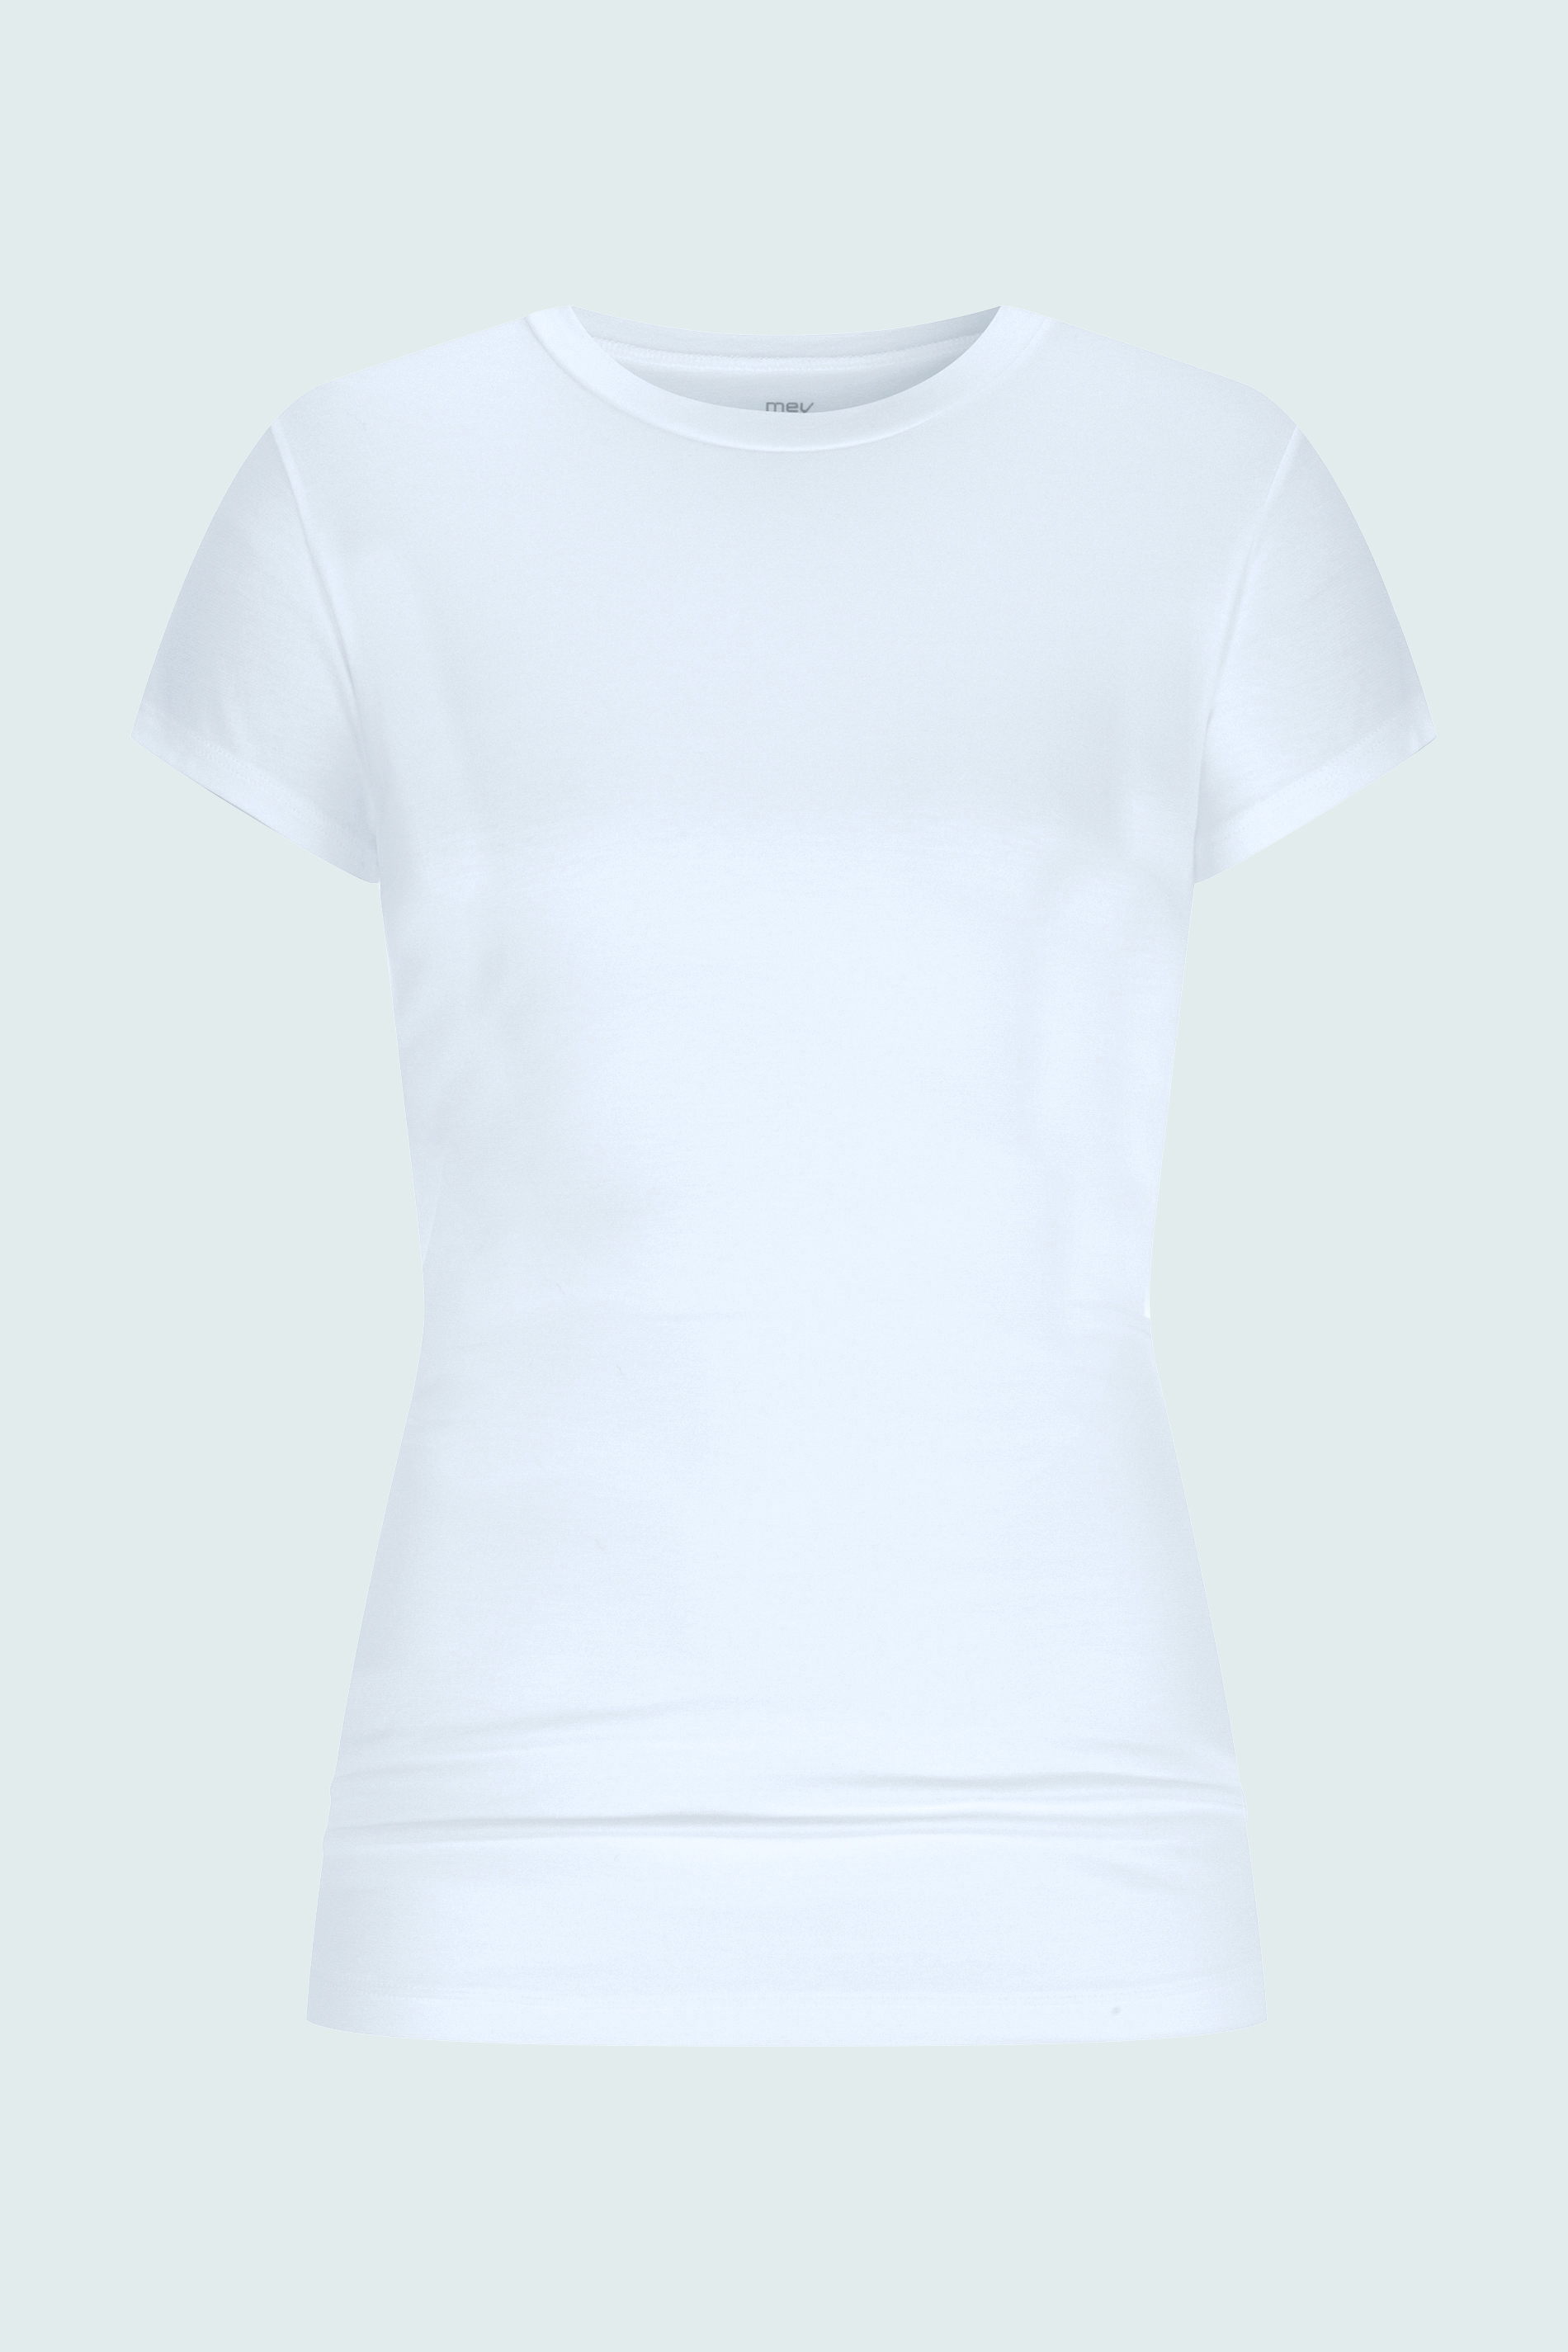 Top 1/2 sleeve White Serie Cotton Pure Cut Out | mey®